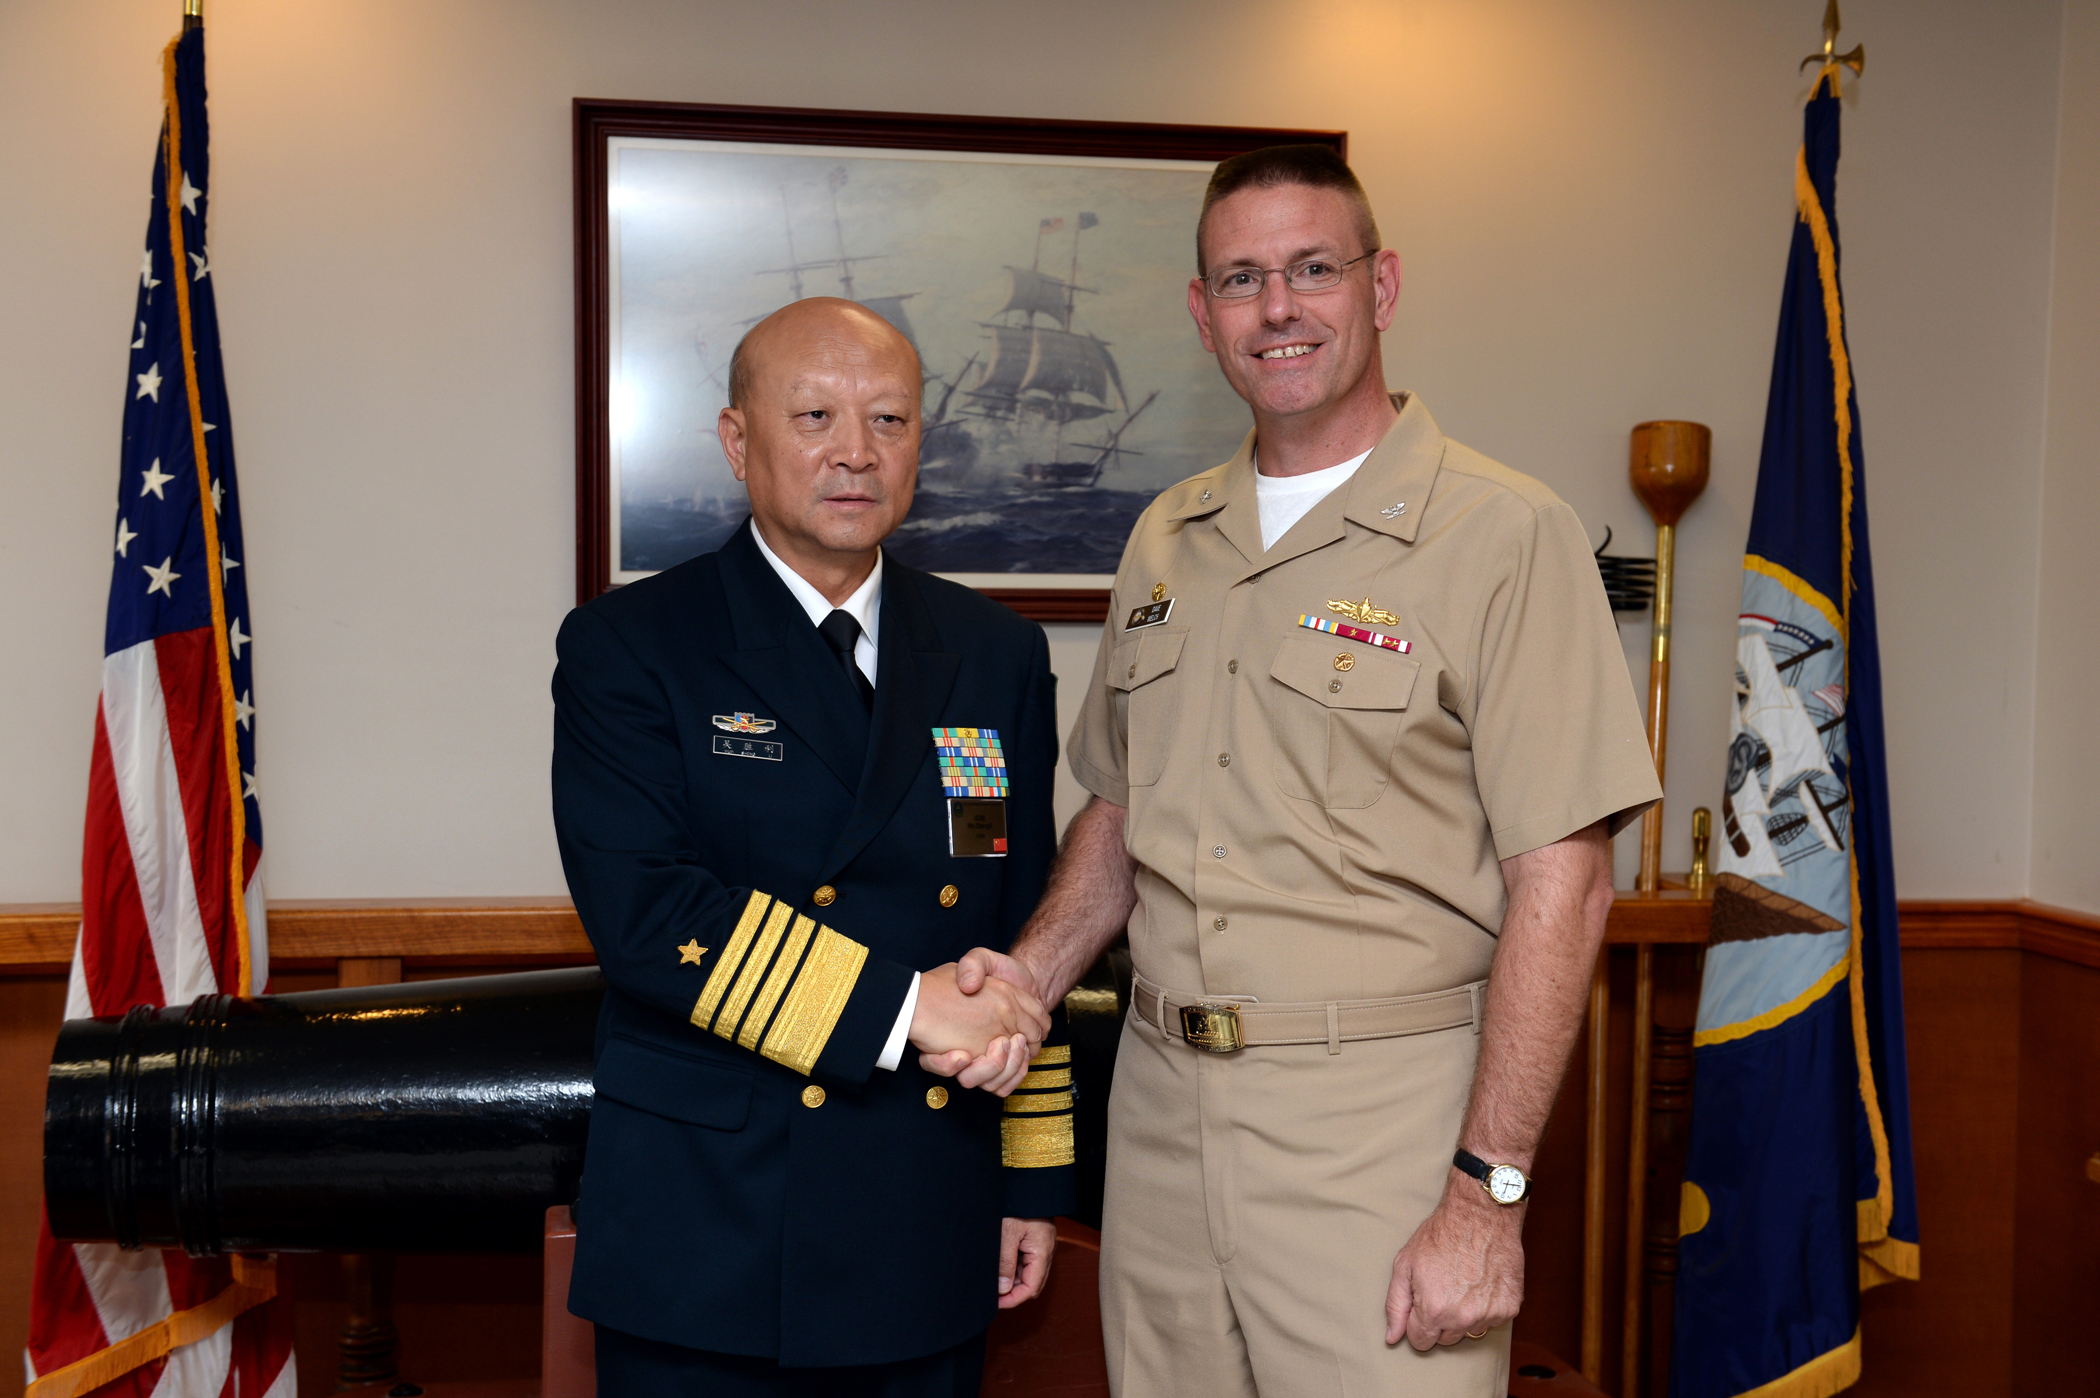 140918-N-PX557-067 NEWPORT, R.I. (Sept. 18, 2014) Commander in Chief of the People's Liberation army navy of the People's Republic of China Adm. Wu Shengli poses for a photo with Capt. Dave Welch, commanding officer, Surface Warfare Officers School (SWOS), at the SWOS quarterdeck onboard Naval Station Newport in Newport, Rhode Island. Welch provided a tour of the school for Shengli and his staff members who are currently in Newport attending the Chief of Naval Operations’ 21st International Seapower Symposium (ISS) at U.S. Navy War College. More than 170 senior officers and civilians from more than 100 countries, including many of the senior-most officers from those countries’ navies, are currently attending ISS, Sept. 16-19. SWOS provides a continuum of professional education and training in support of surface Navy requirements that prepares officers and enlisted engineers to serve at sea. (U.S. Navy photo by Chief Mass Communication Specialist James E. Foehl/Released)